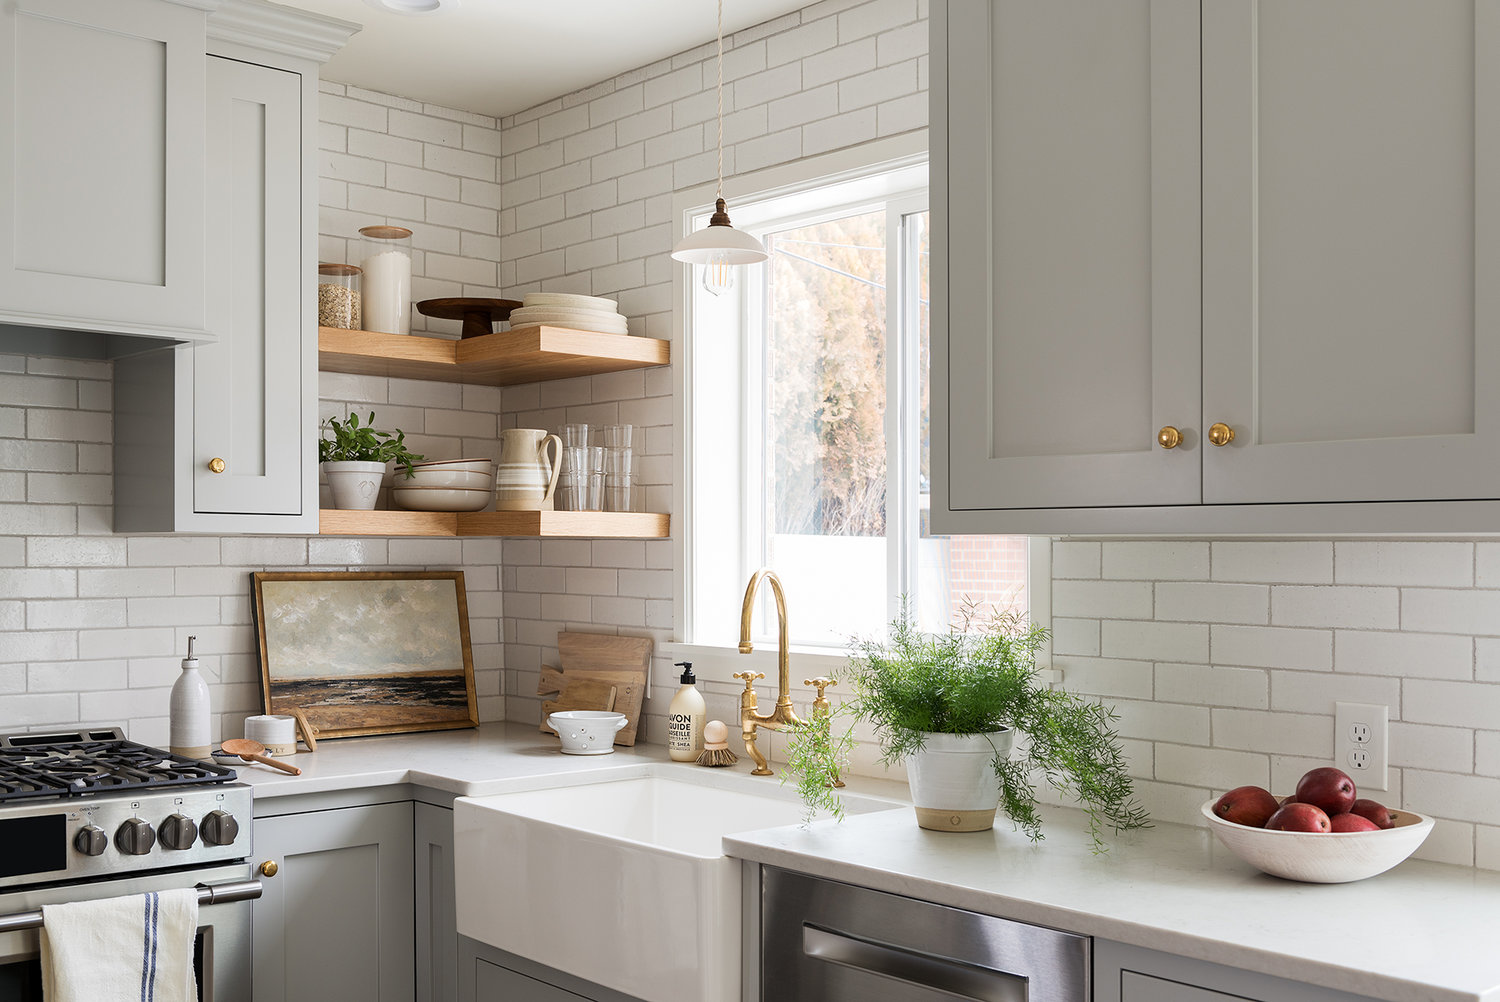 8 Great Neutral Cabinet Colors For, Best Kitchen Cabinet Color Benjamin Moore